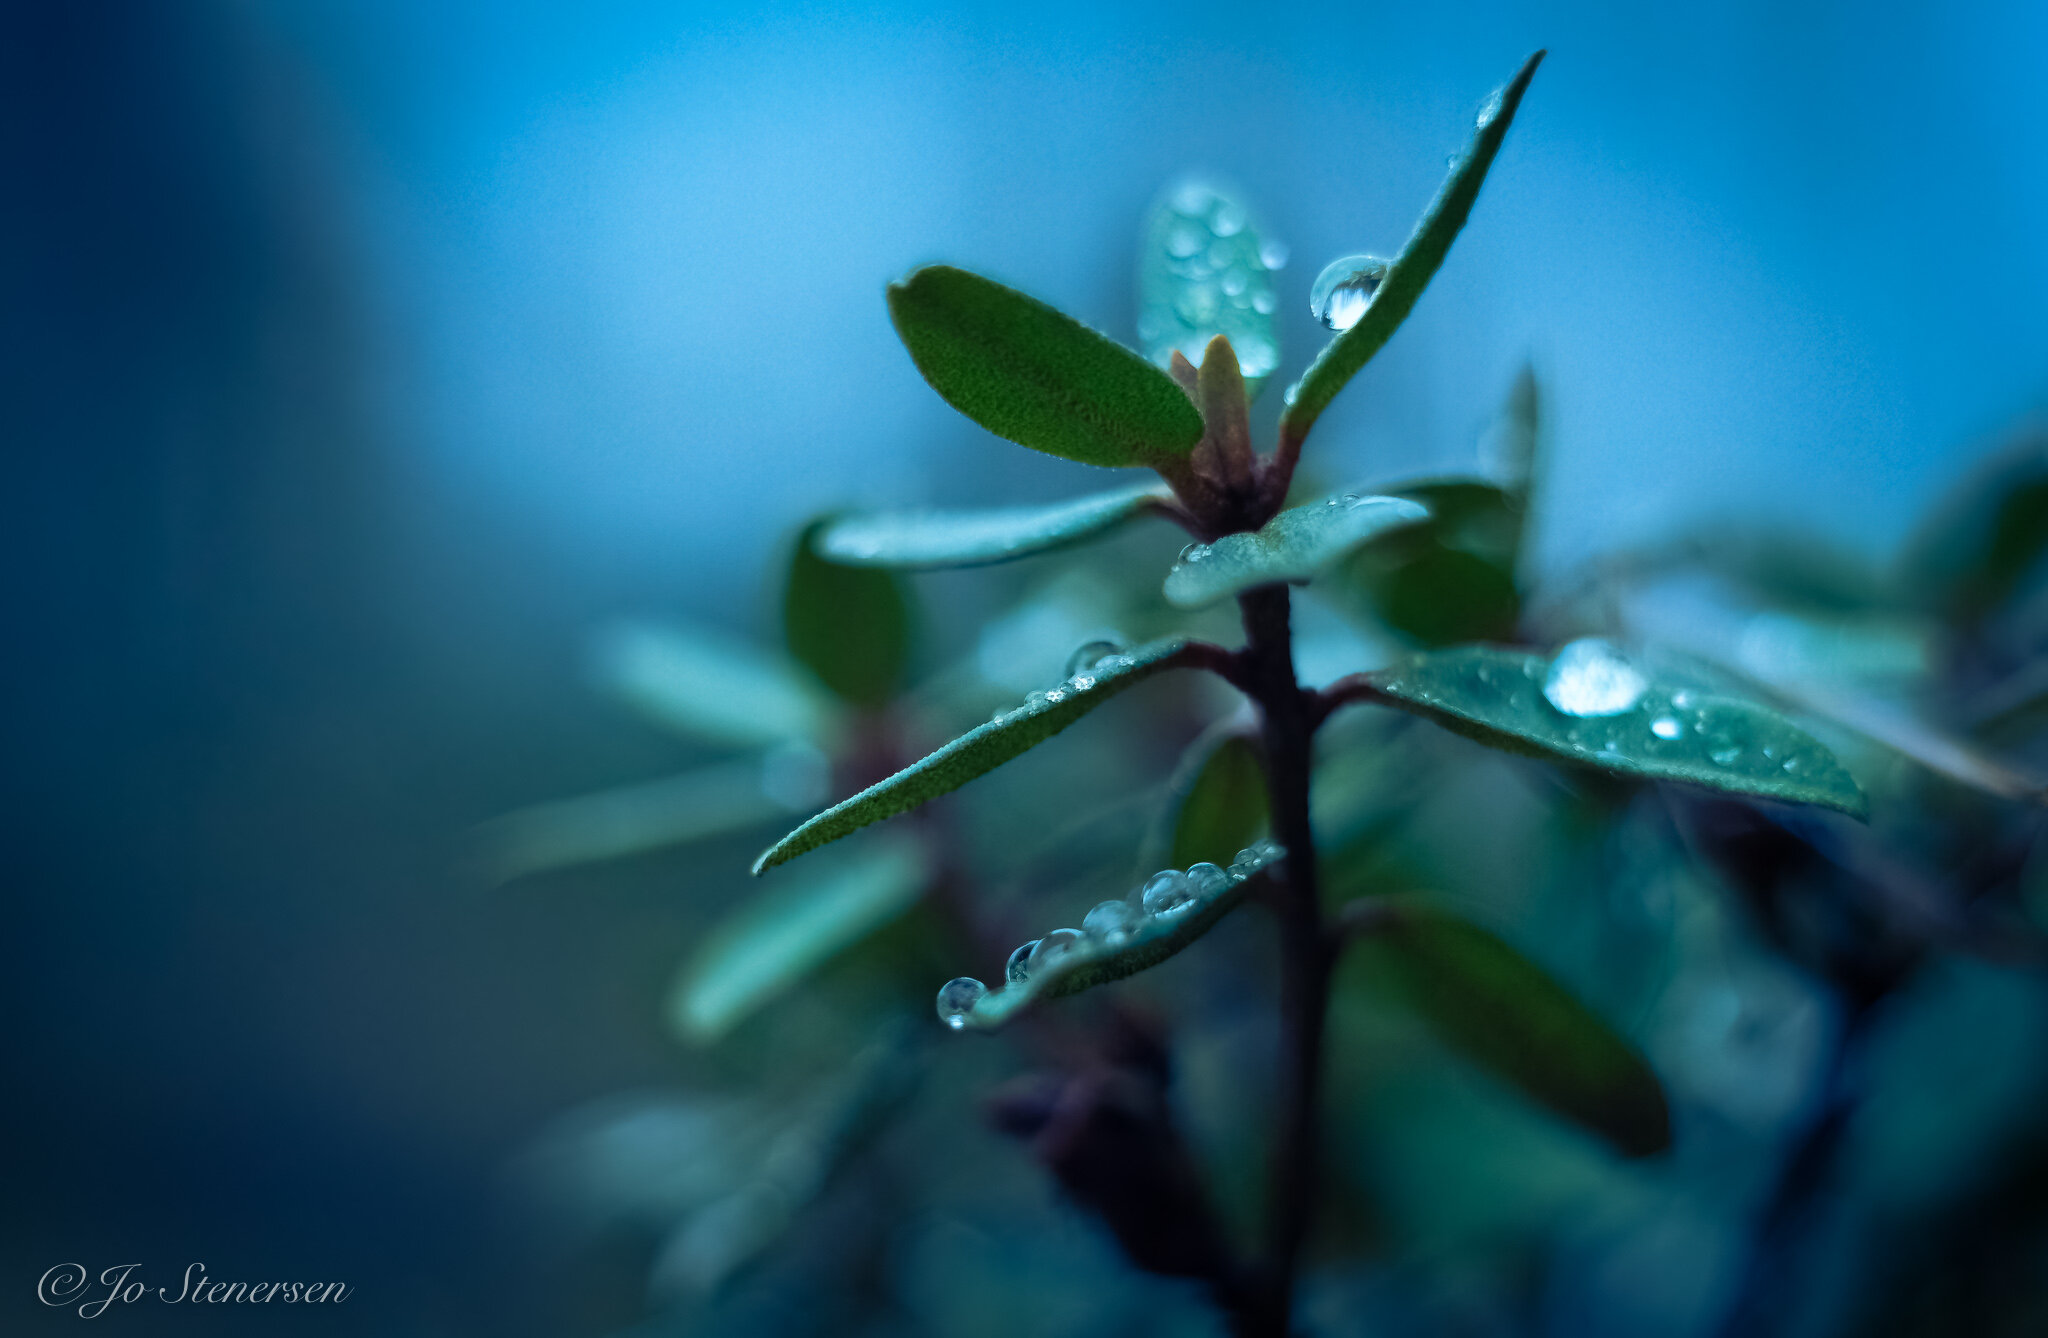 Pentacon 50mm f/1.8 - an imperfect jewel (according to my taste ...